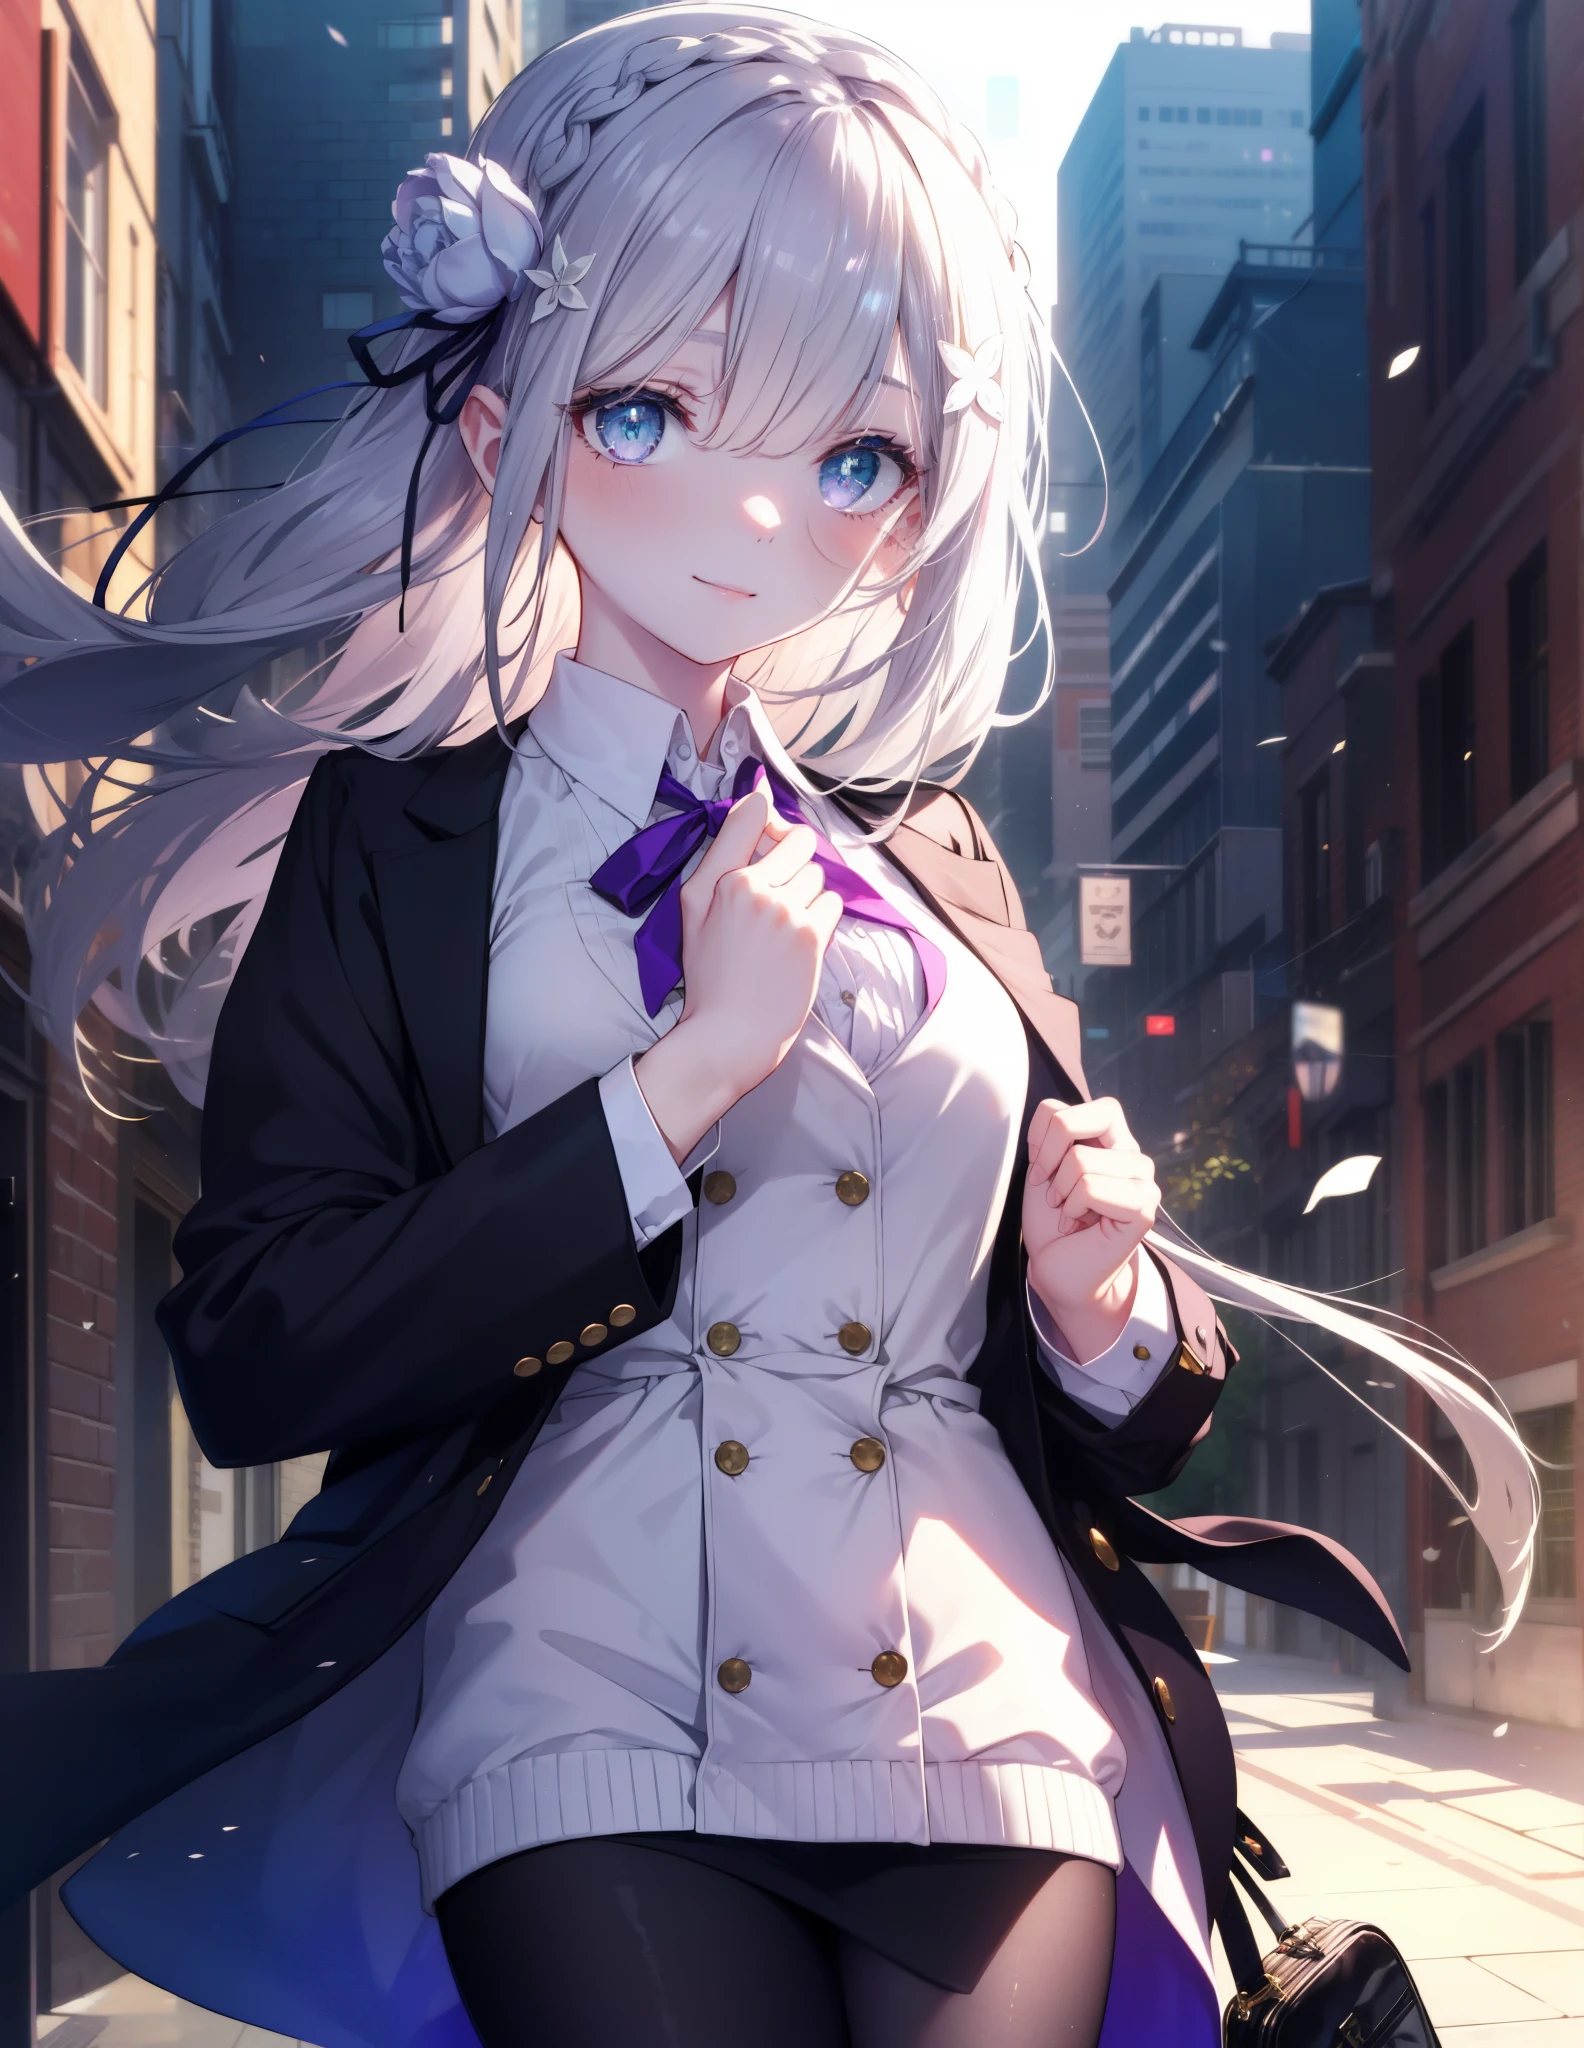 reZEROEmilia, emilia, Braid, crown Braid, flower, hair flower, hair ornaments, hair ribbon, long hair, headlock, (purple eyes:1.2), pointed ears, white flower, x hair ornaments, close your mouth,red glasses, fund, black suit jacket, collared jacket, white dress shirt, collared shirt, neckline, button, strap, ID card on neck, black pencil skirt, black pantyhose stiletto heels,business bag,blush,smile,morning,morning陽
BREAK outdoors,building street,街中
BREAK looking at viewer, (cowboy shot:1.5),
BREAK (masterpiece:1.2), highest quality, High resolution, unity 8k w all paper, (shape:0.8), (beautiful and detailed eyes:1.6), highly detailed face, perfect lighting, Very detailed CG, (perfect hands, perfect anatomy),